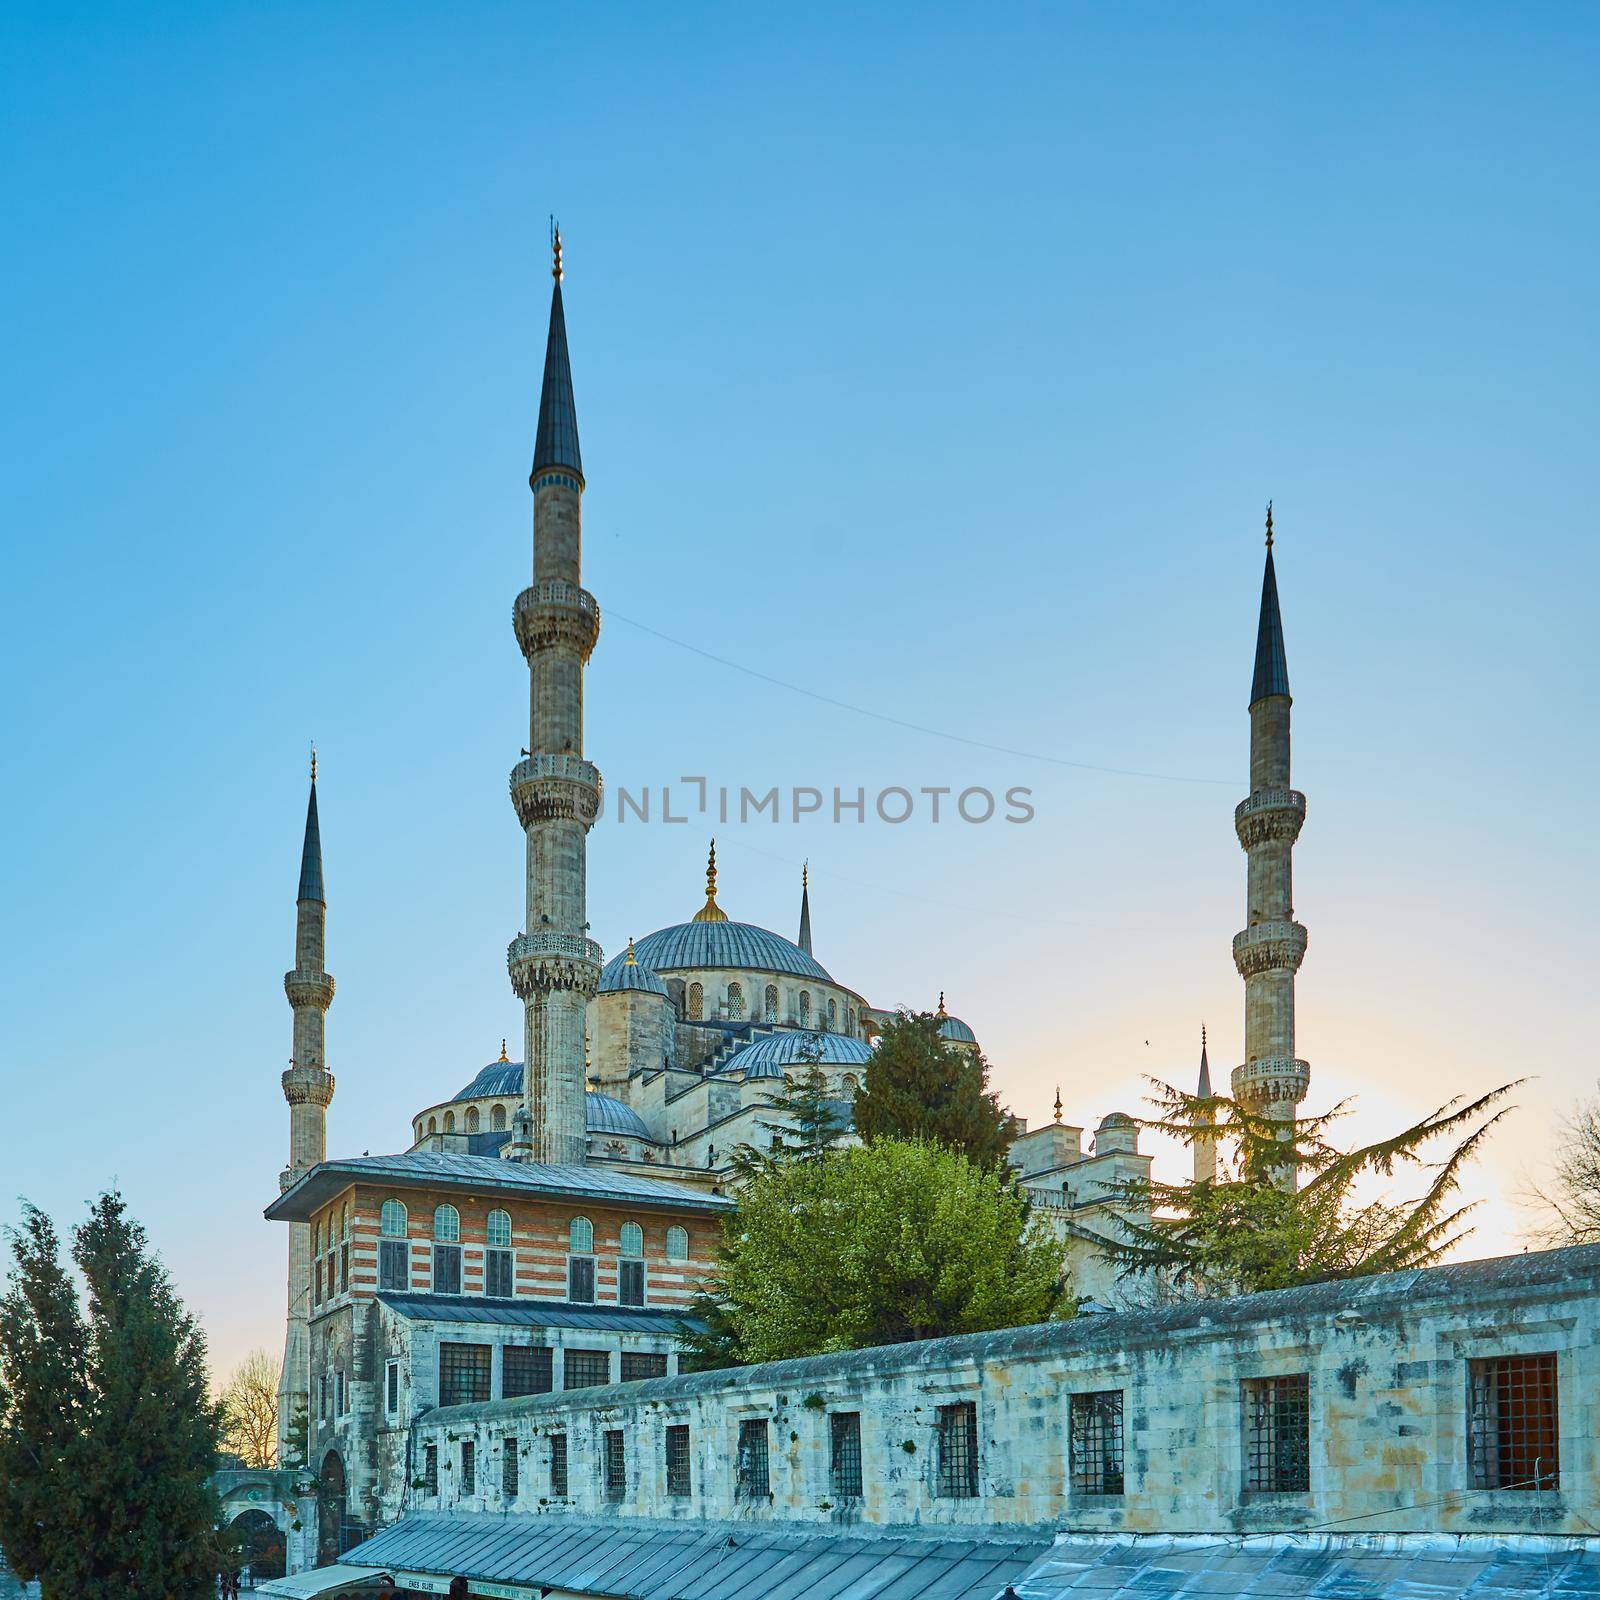 The Blue Mosque also called Sultan Ahmed Mosque or Sultan Ahmet Mosque in Istanbul, Turkey.